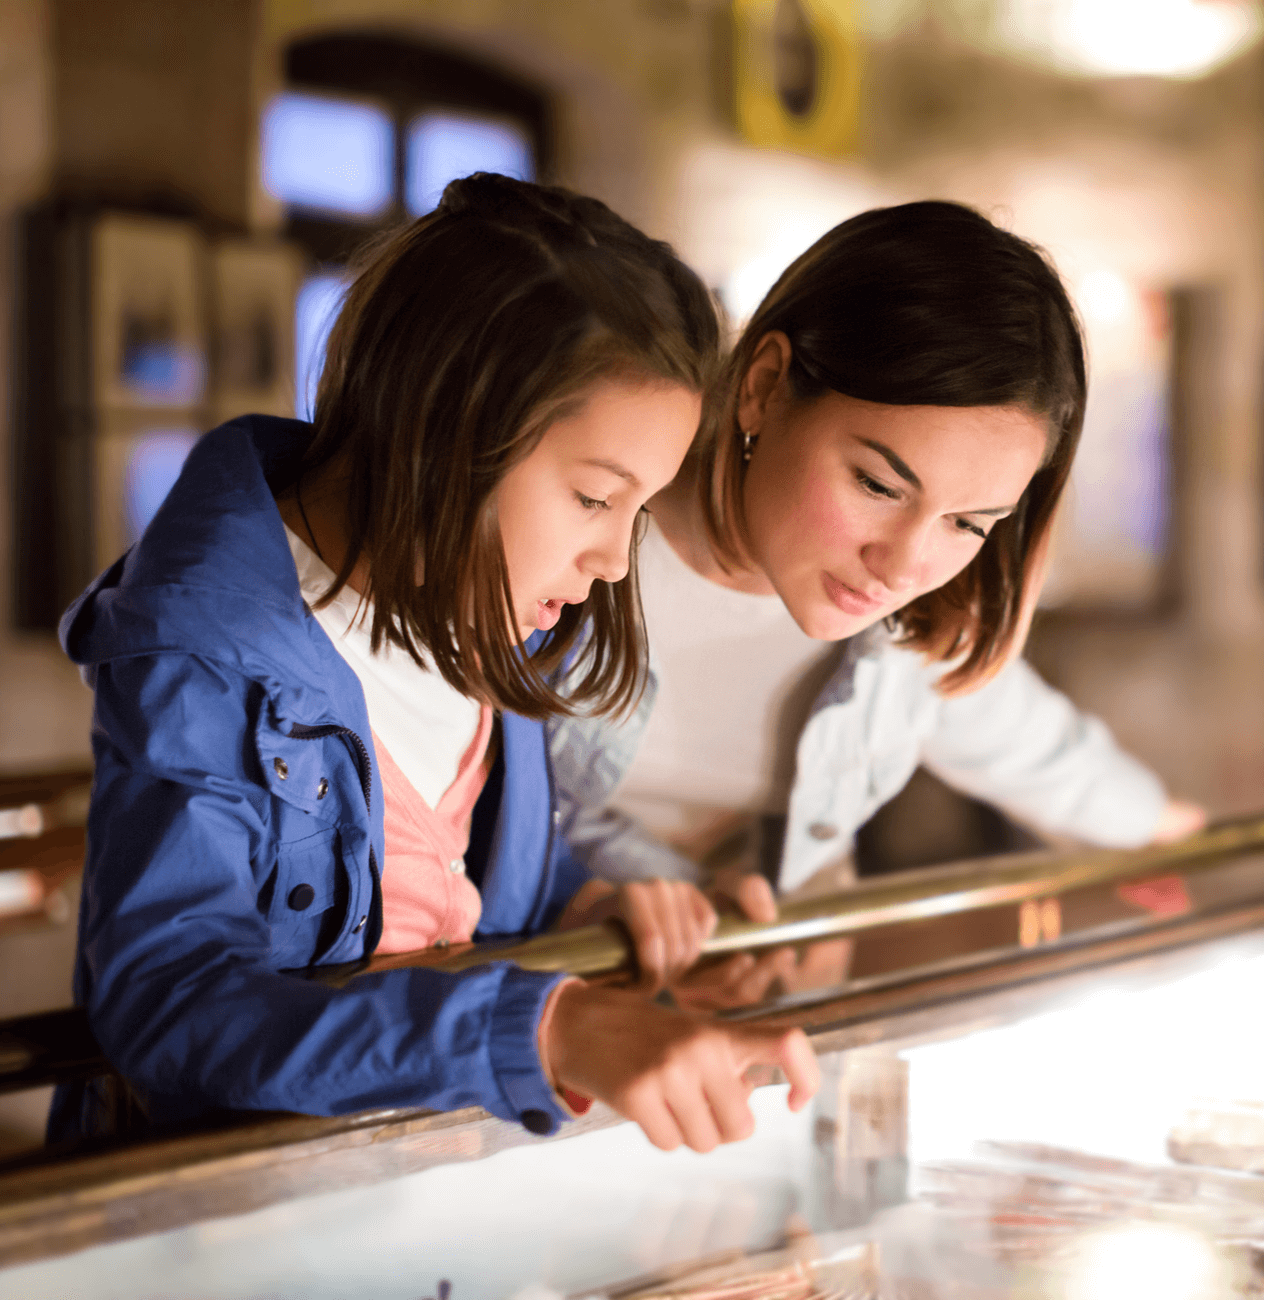 Mother and daughter examining an exhibit at a museum.